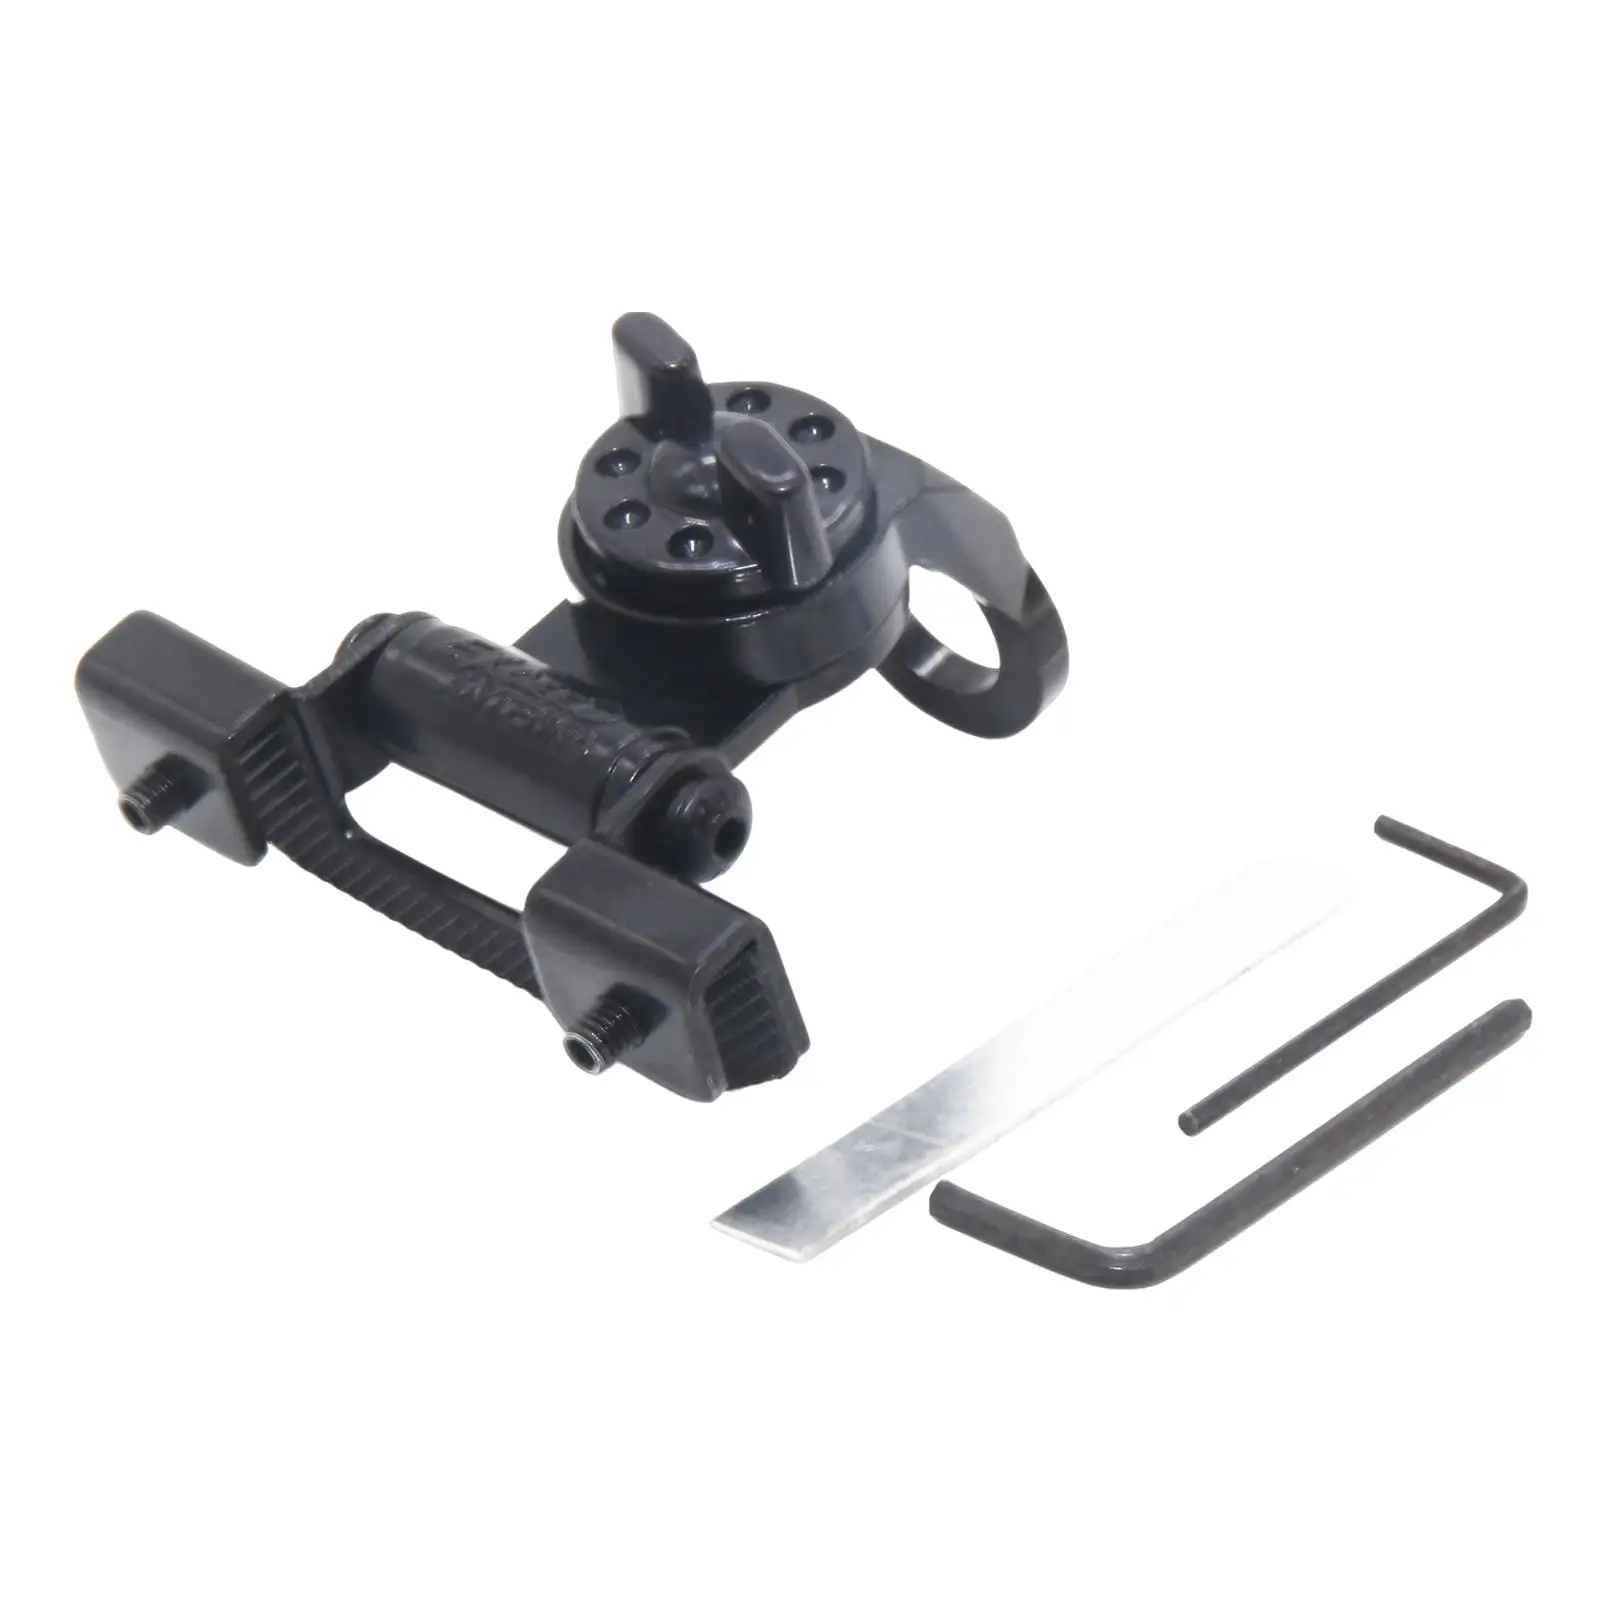 

for Em-81 Car Mobile Radio Antenna Bracket Base Clip Professional Small Size Portable Easily Install Antenna Mounting Holder